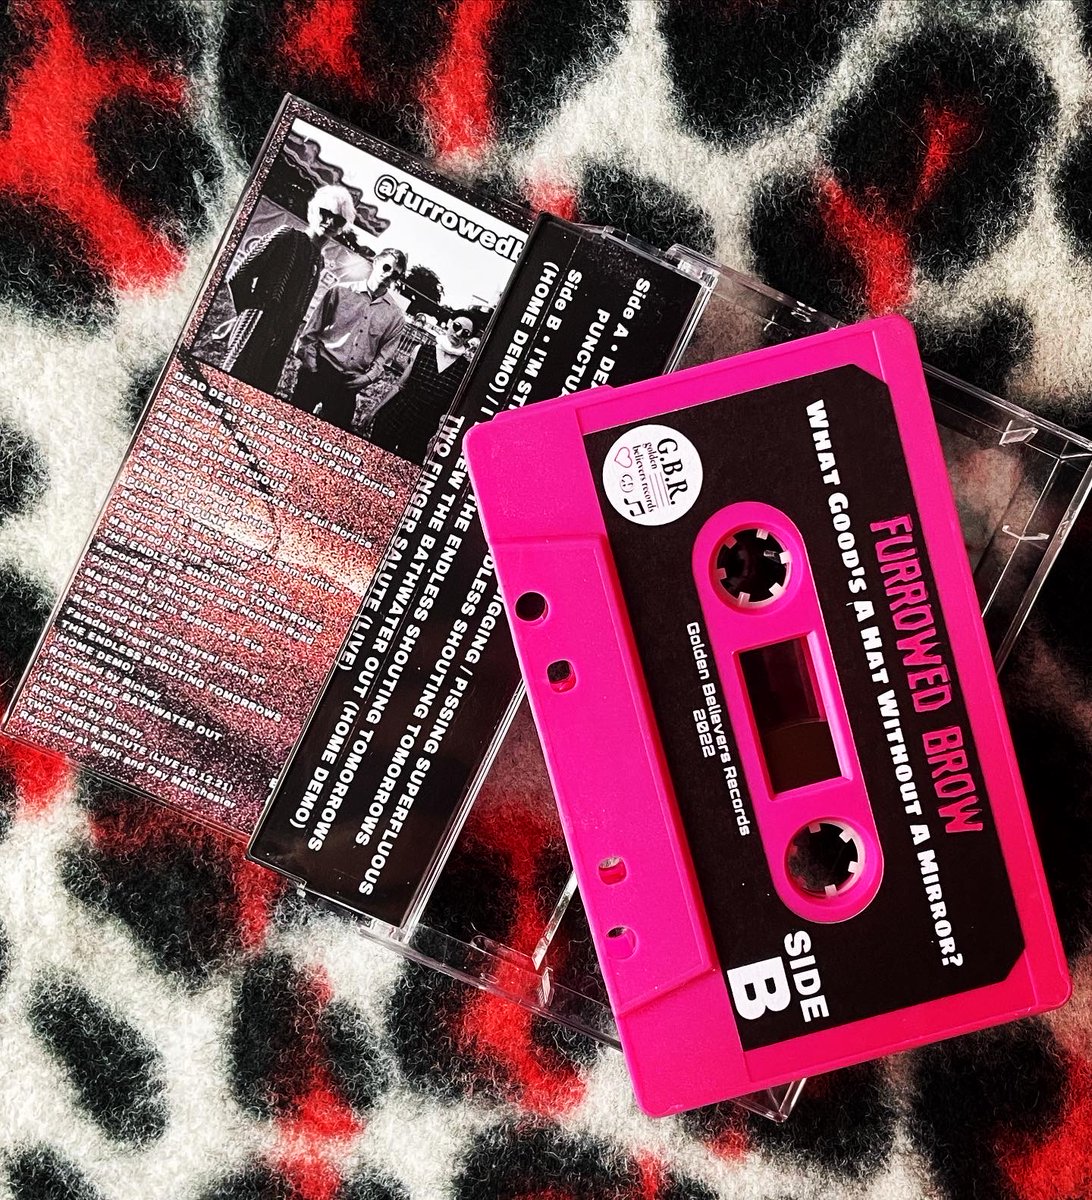 Pre-sale just started: only 25 cassettes available furrowedbrowband.bandcamp.com/album/what-goo…